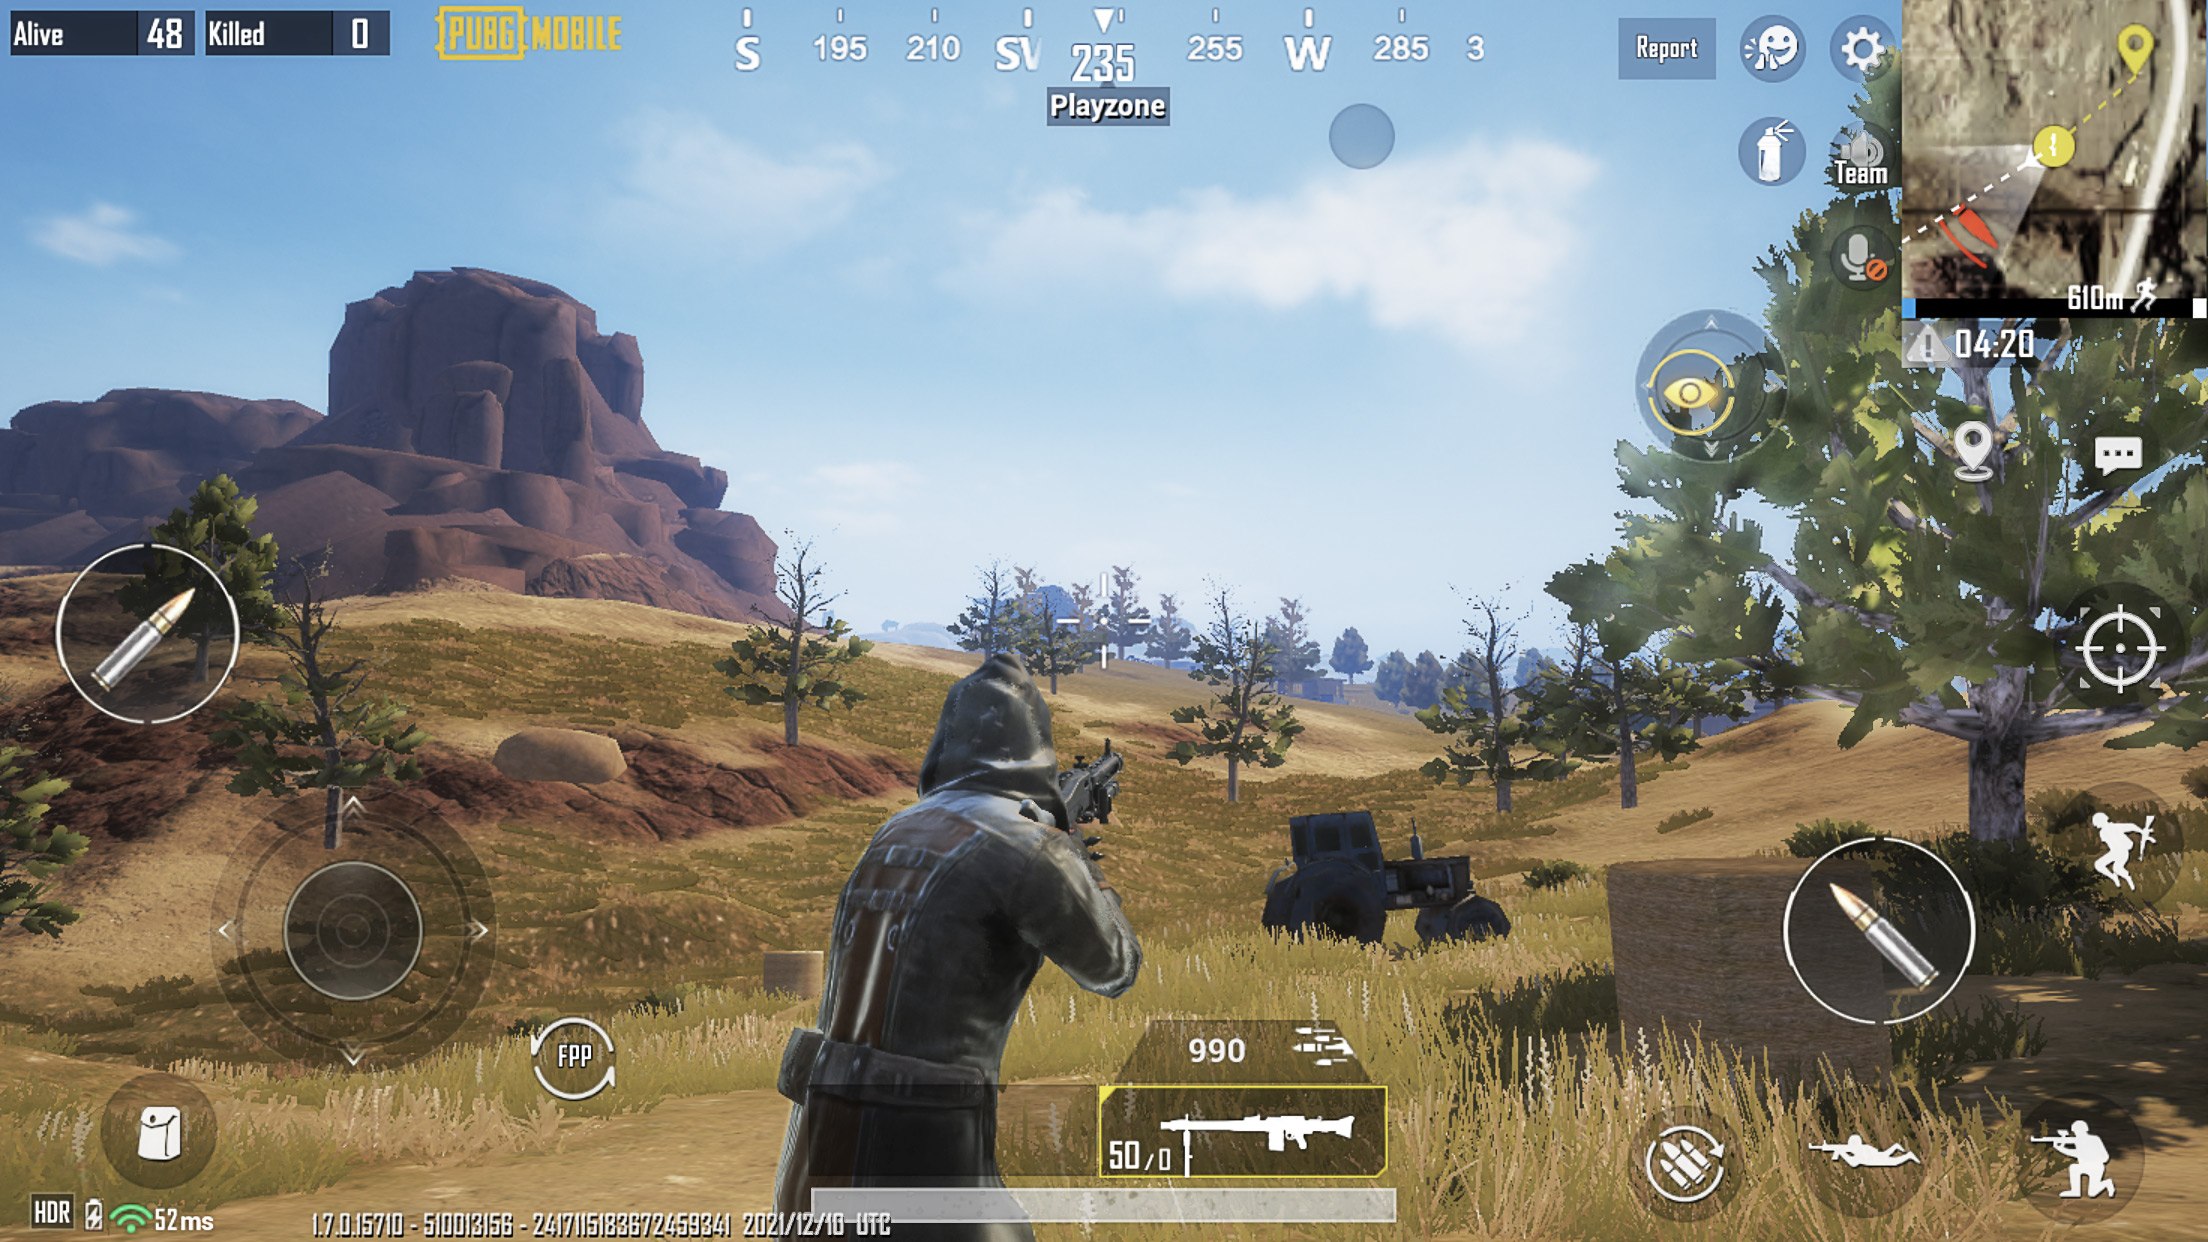 PUBG MOBILE Reveals their Newest Map 'Nusa', to be Released in the Next Update